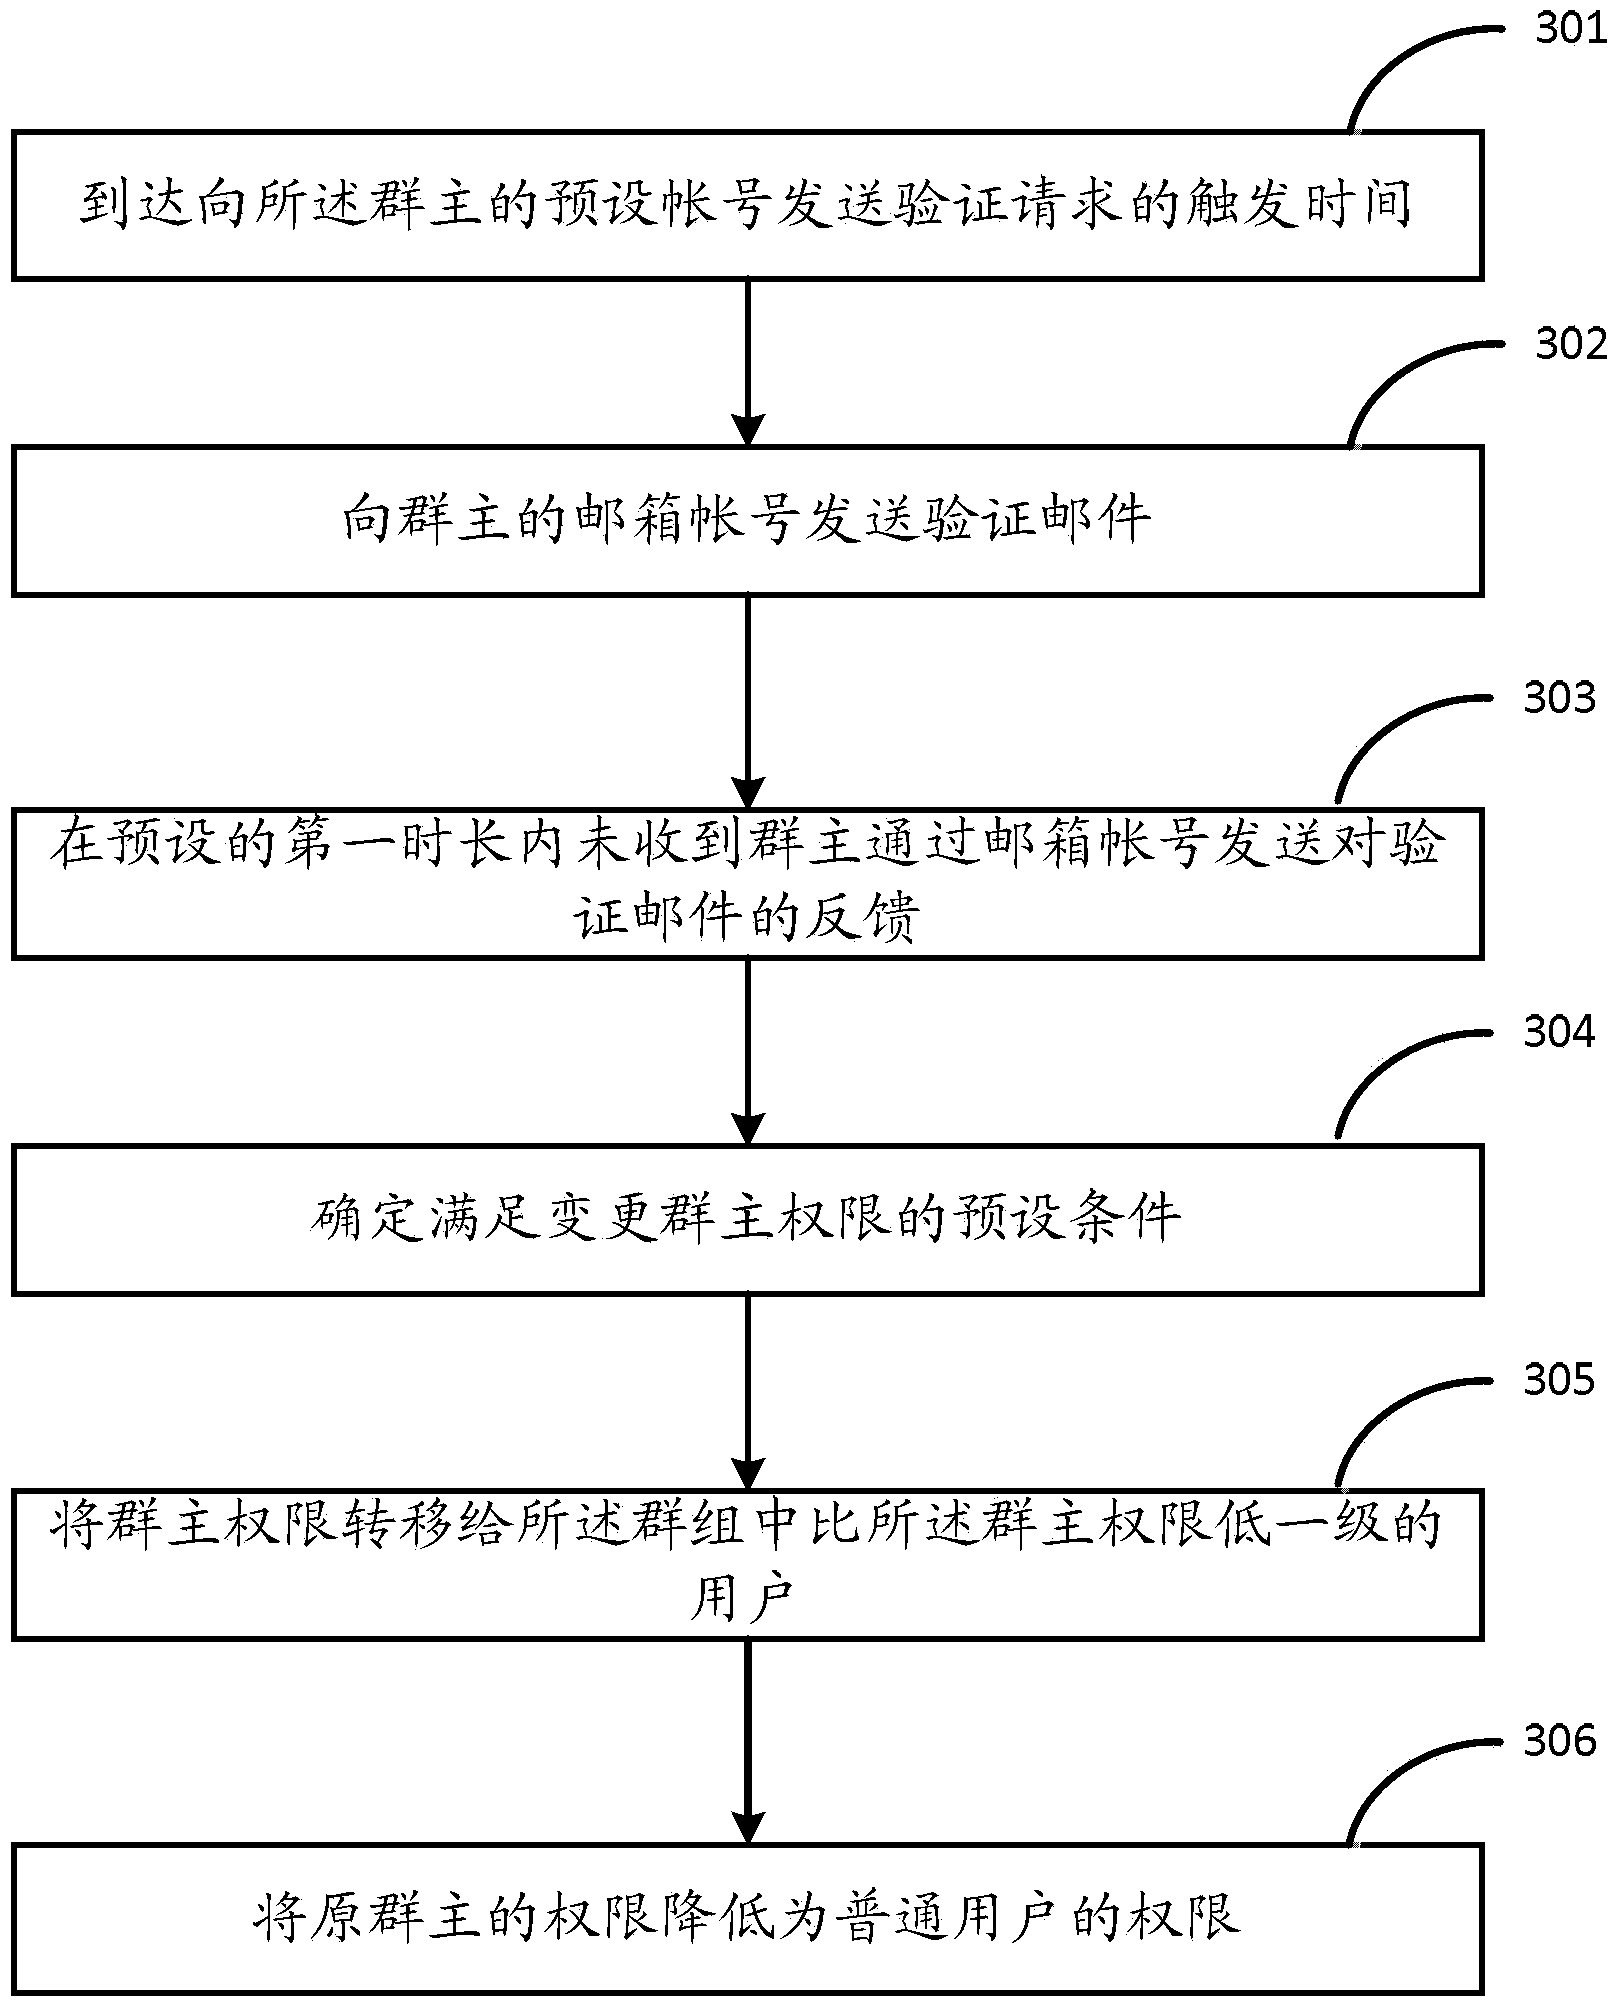 Method and device for controlling user permission